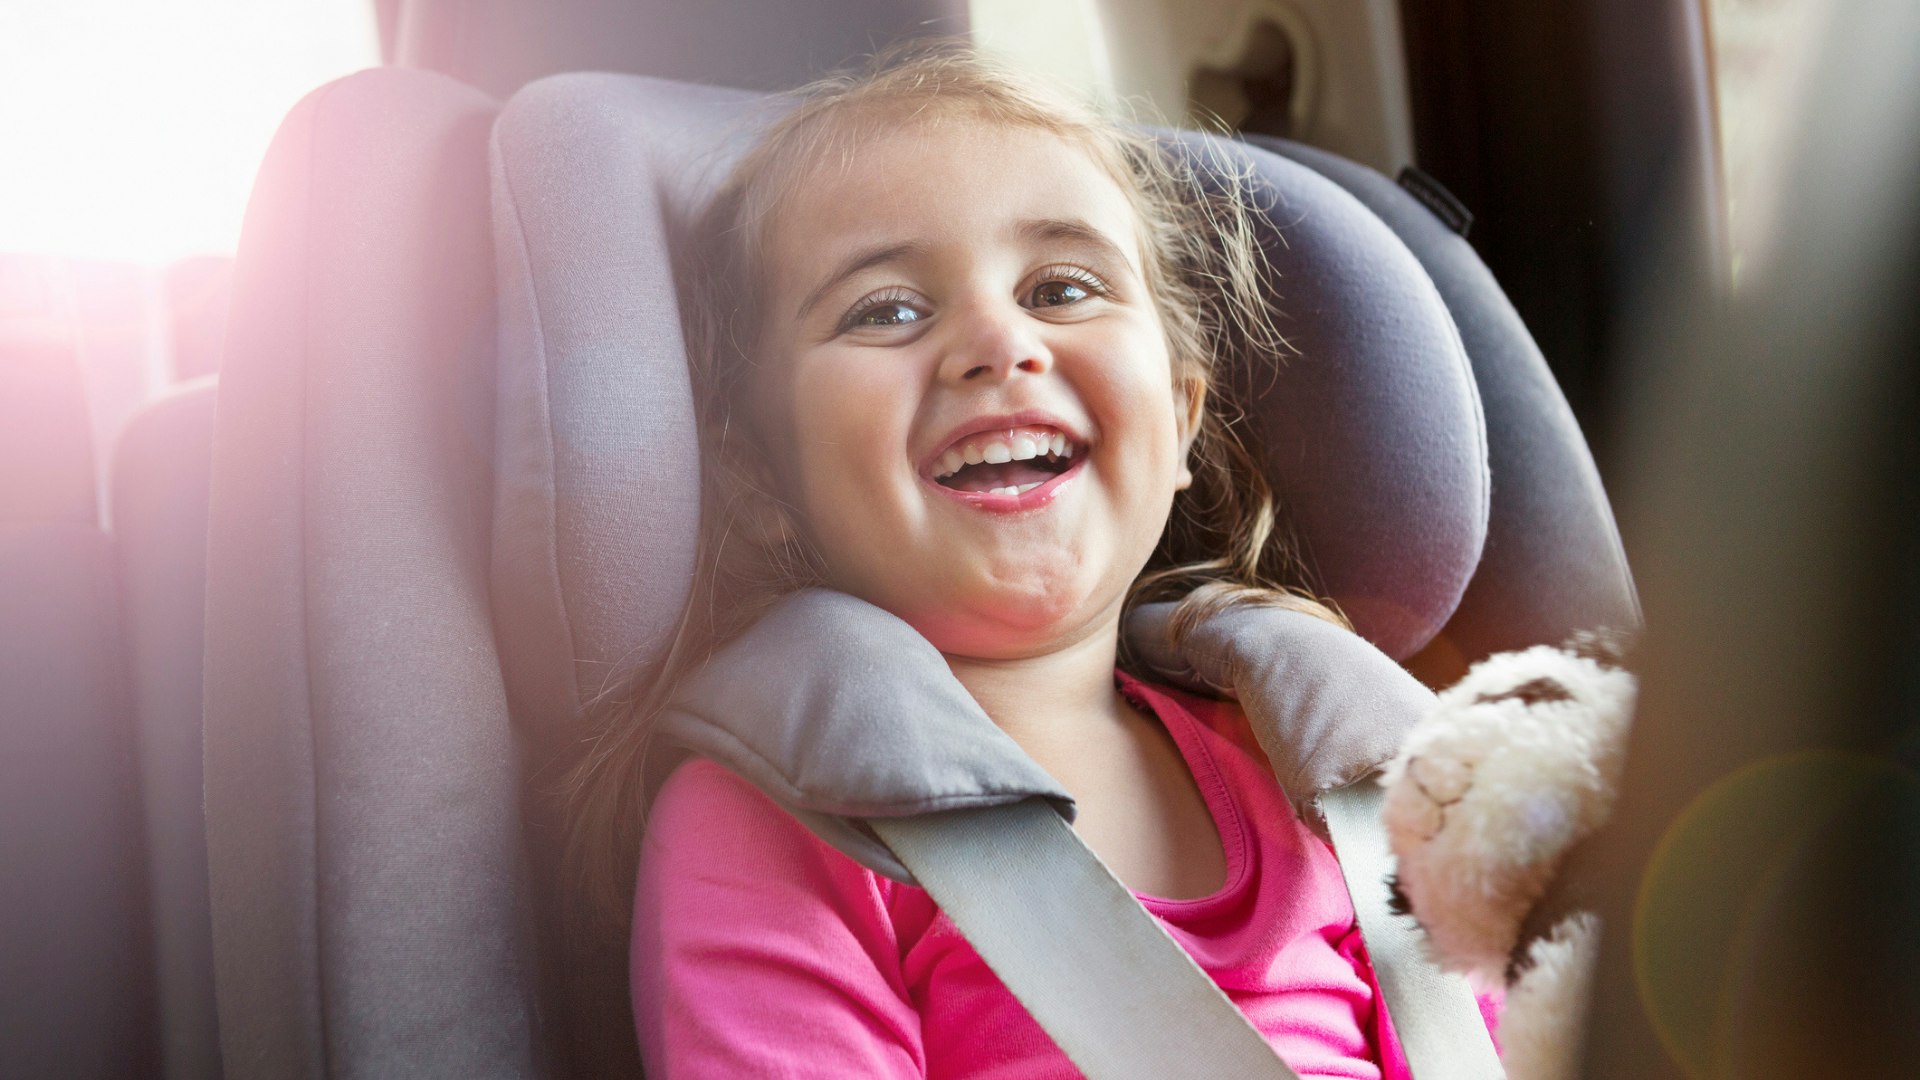 The Four Stages Of Car Seat Safety - Car Seats For The Littles